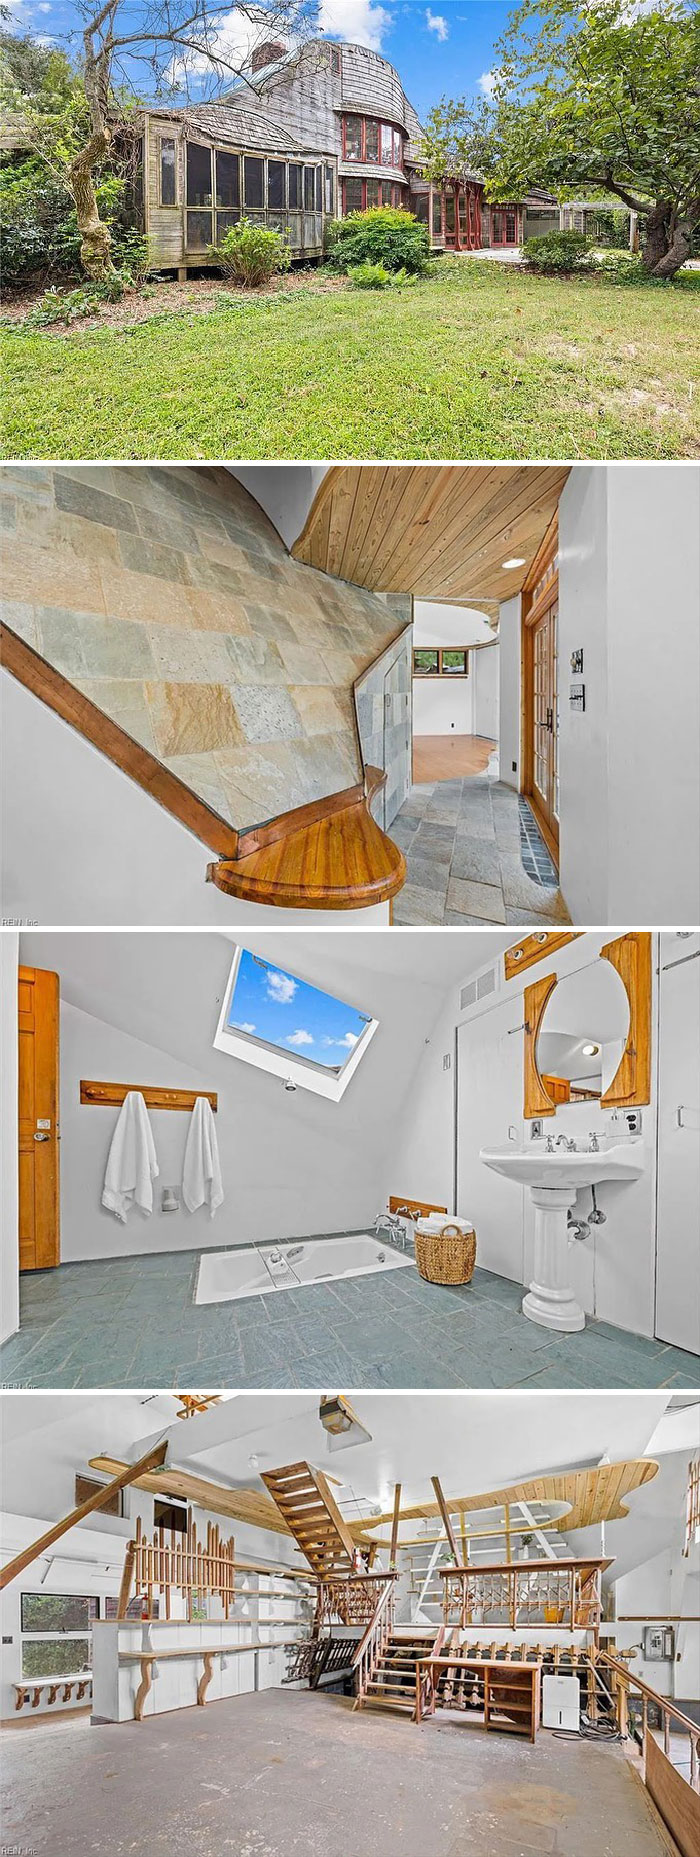 I Am Baffled By This House. The Wavy Wood Has Me Super Confused. As Does The Last Picture… Also #deathtraptub